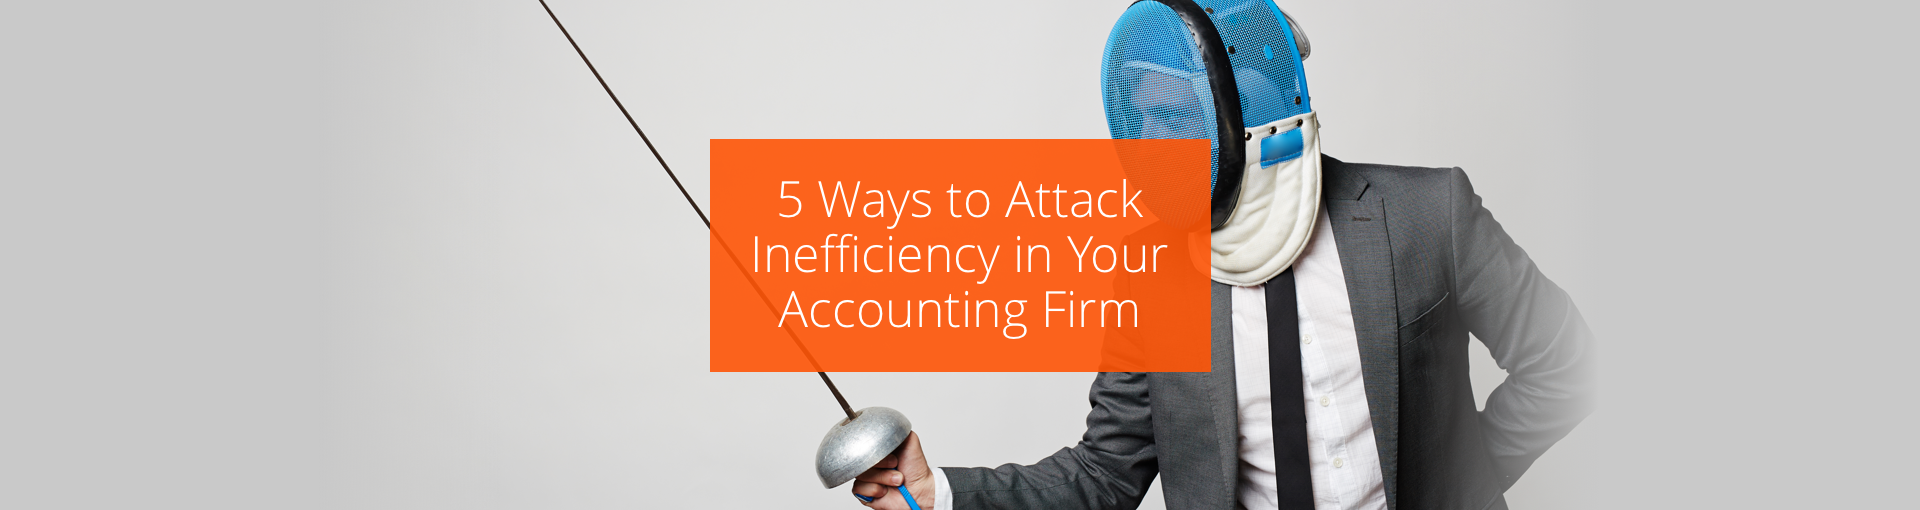 5 Ways to Attack Inefficiency in Your Accounting Firm Featured Image